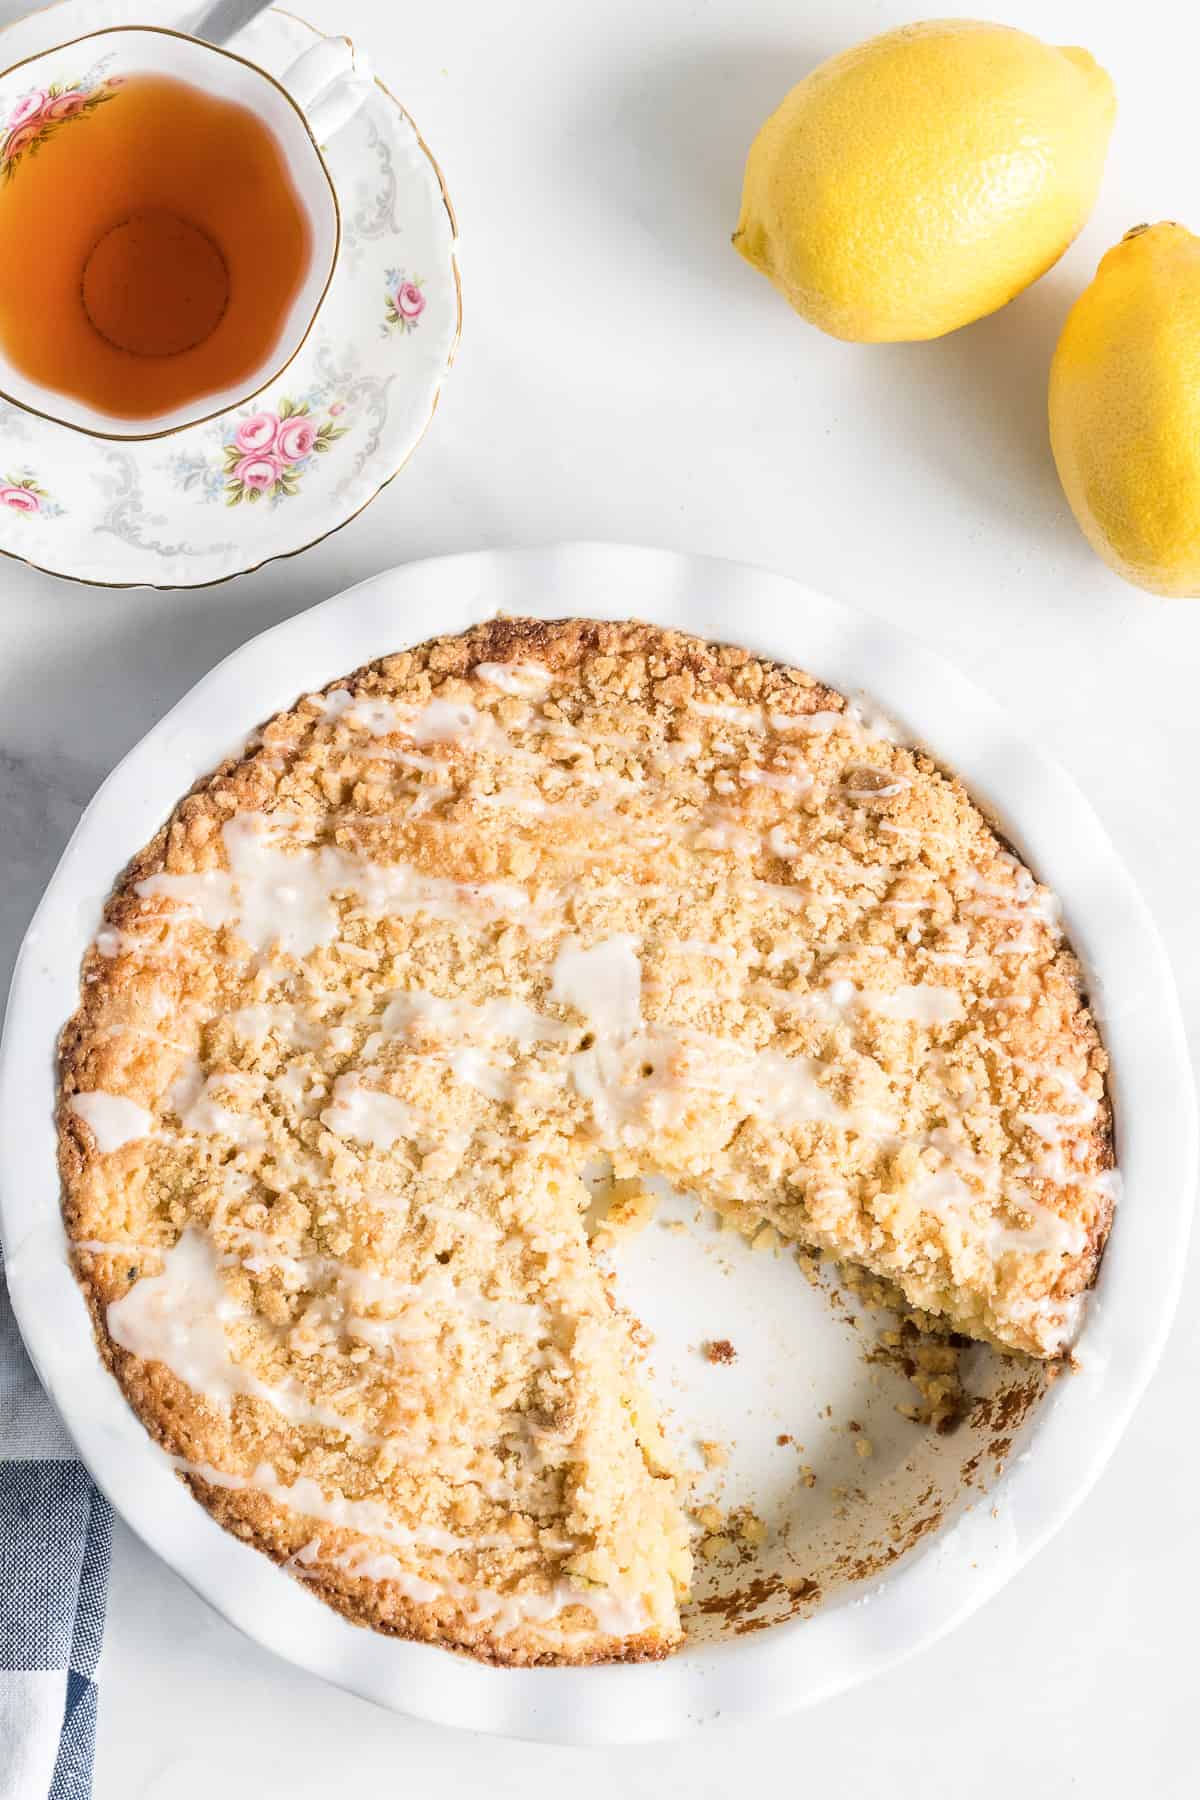 Lemon Zucchini Coffee Cake in a round baking dish with a cup of tea in the background.